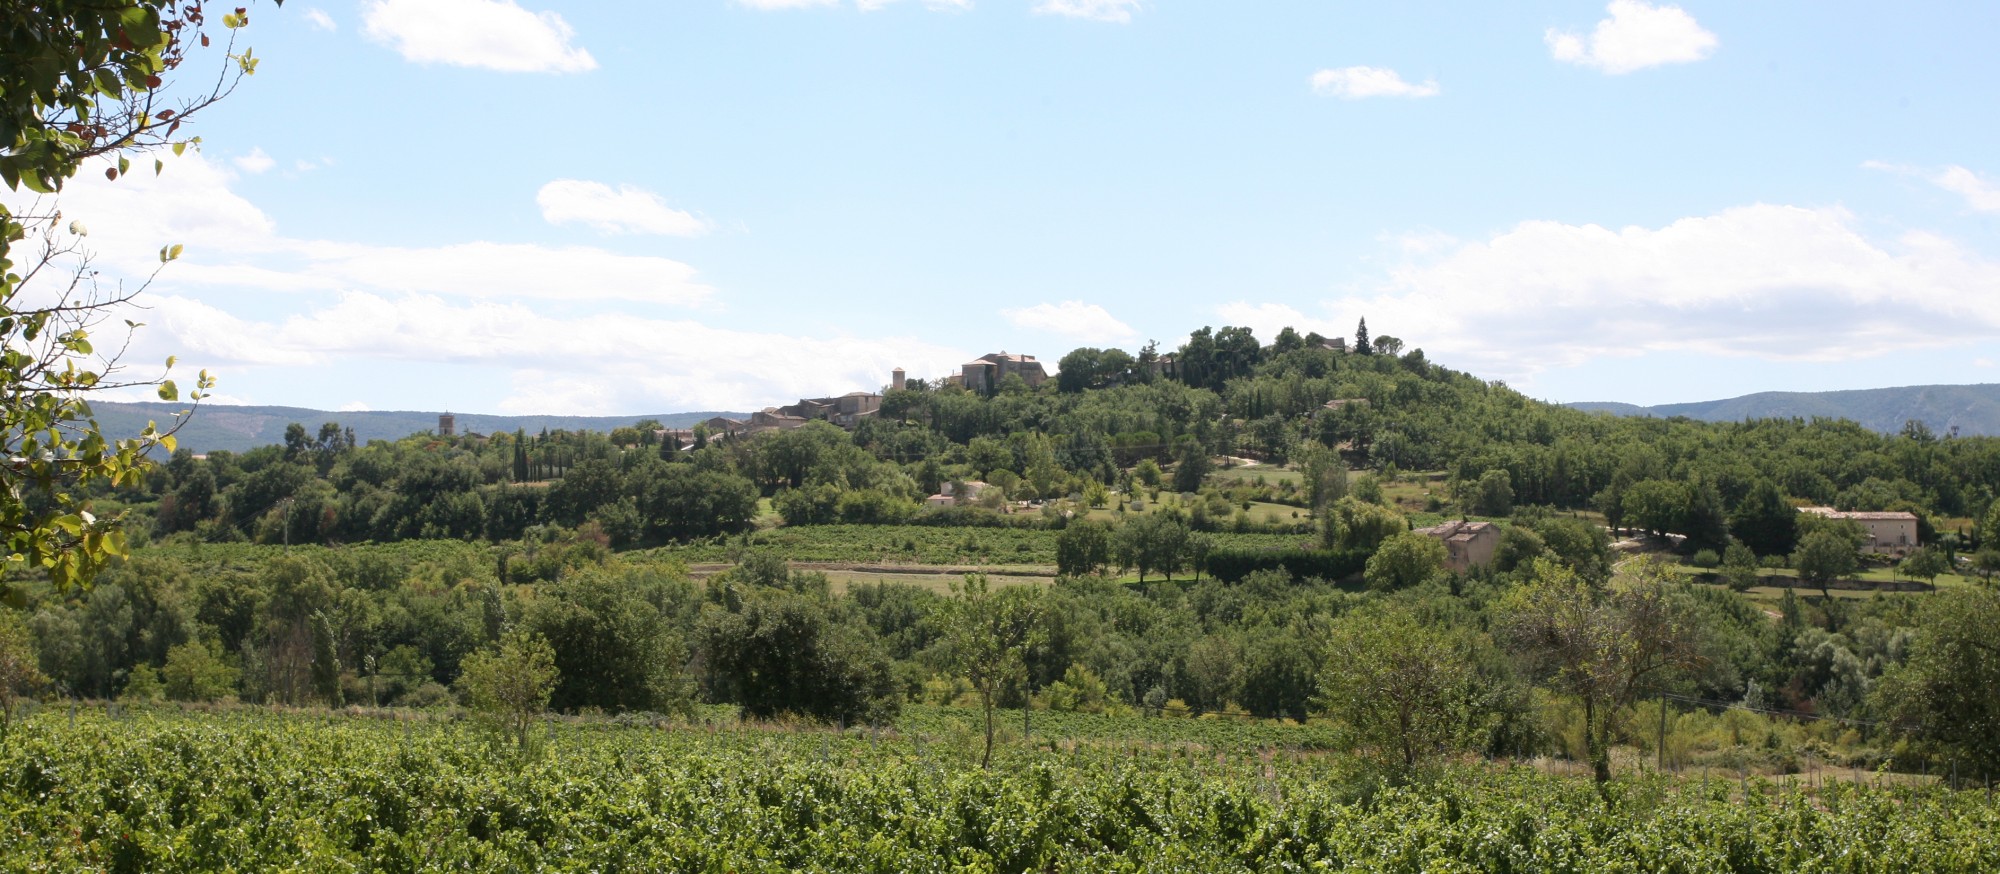 GOULT in Luberon, located between Gordes, Roussillon, Lacoste and Ménerbes